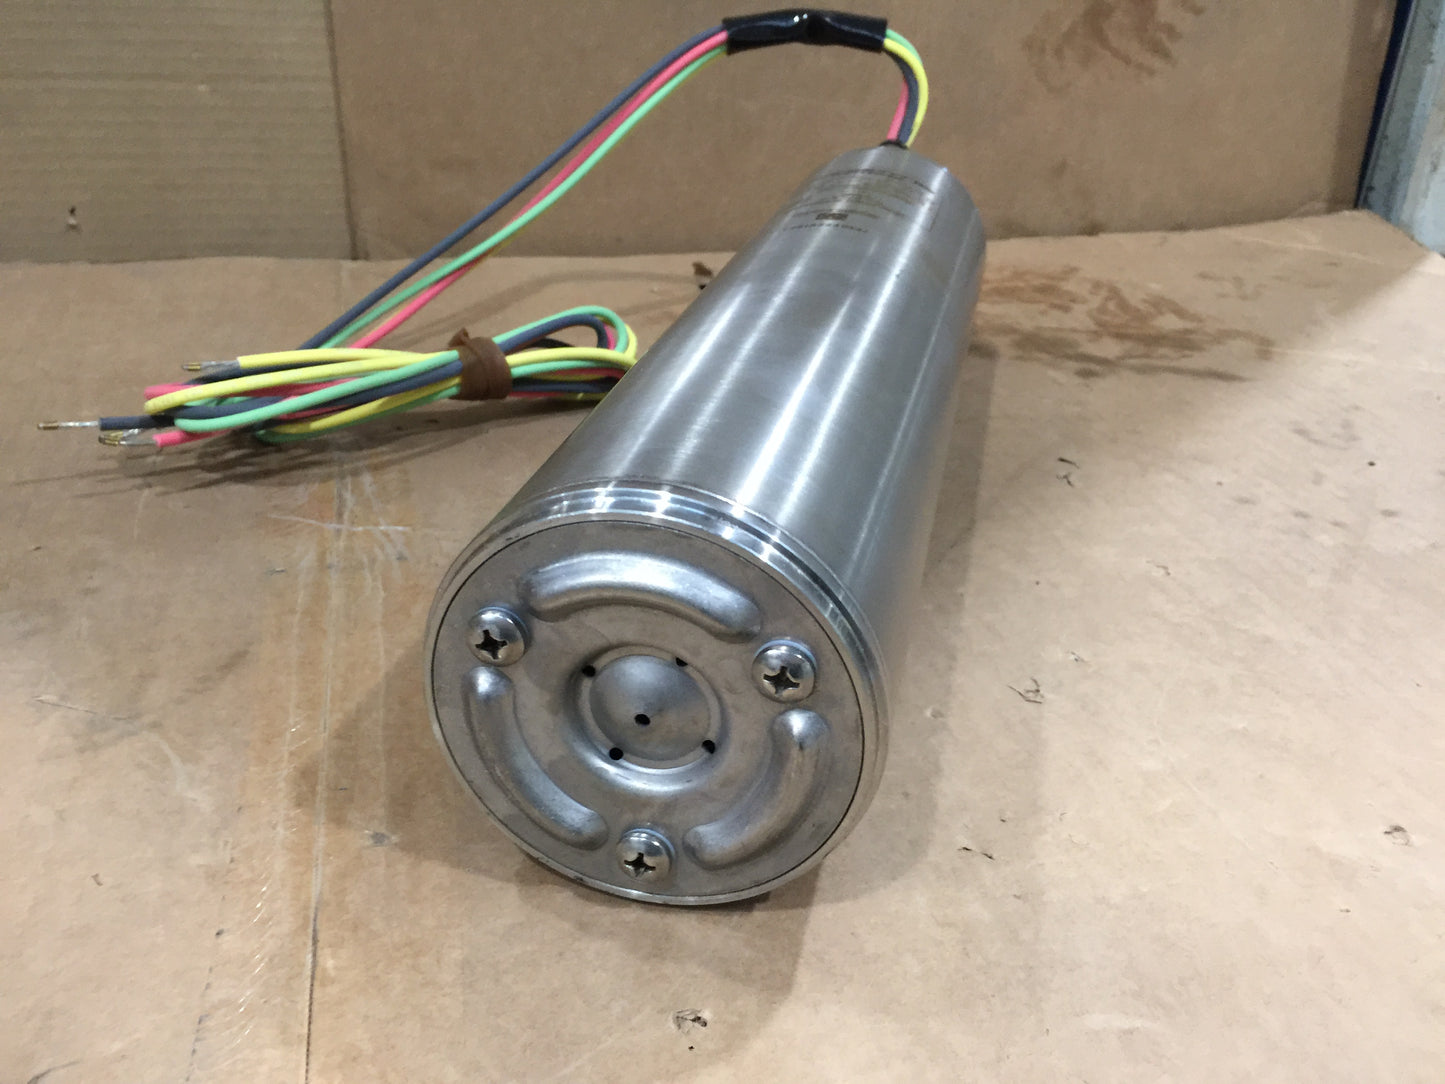 2 HP SUBMERSIBLE ELECTRIC PUMP MOTOR; 230/60/1, RPM 3450, 9.9 AMPS, 1.50 KW